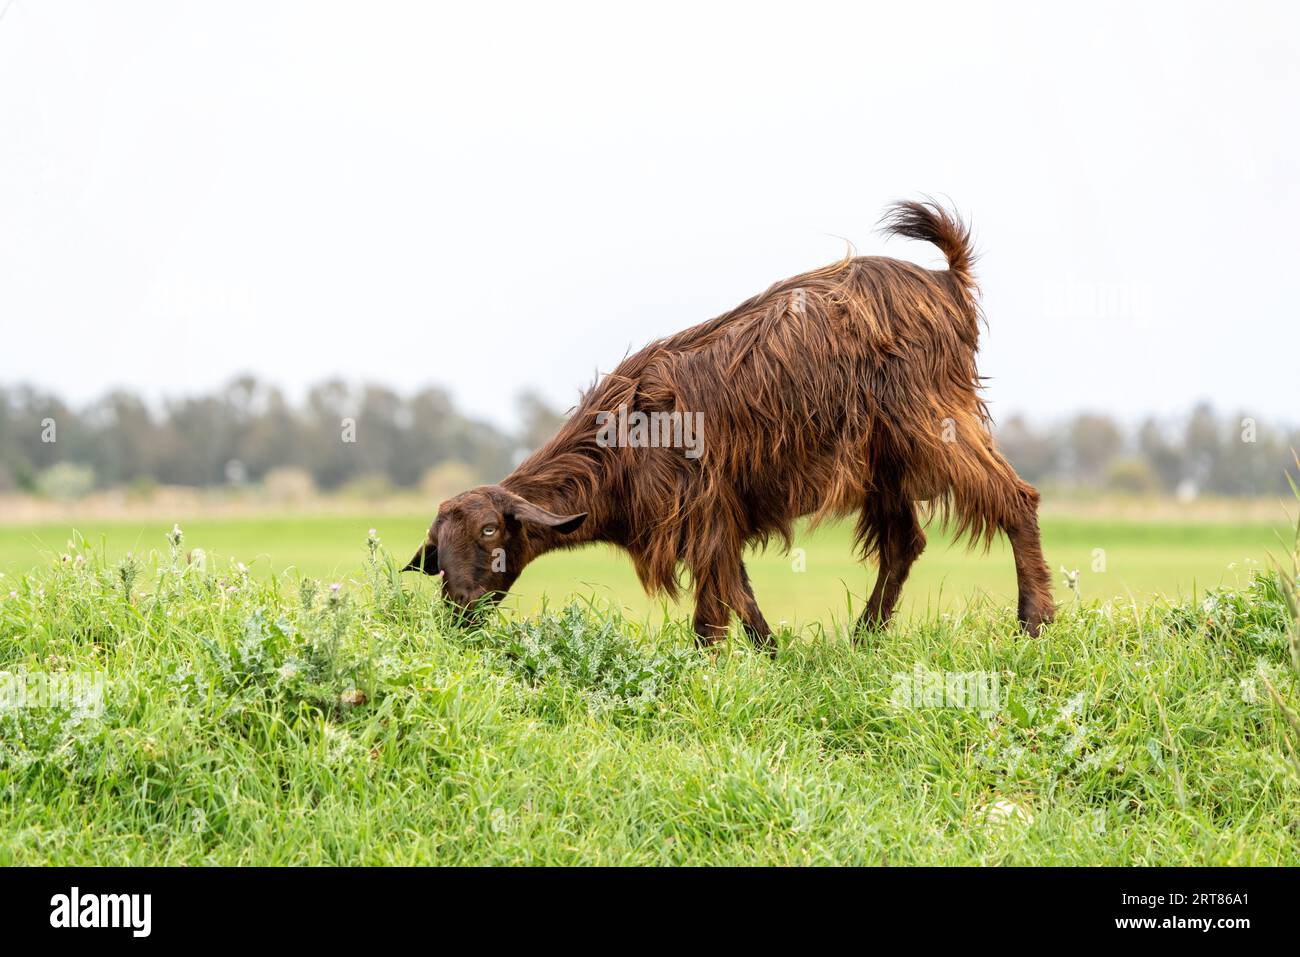 A goat grazing with its herd. Stock Photo